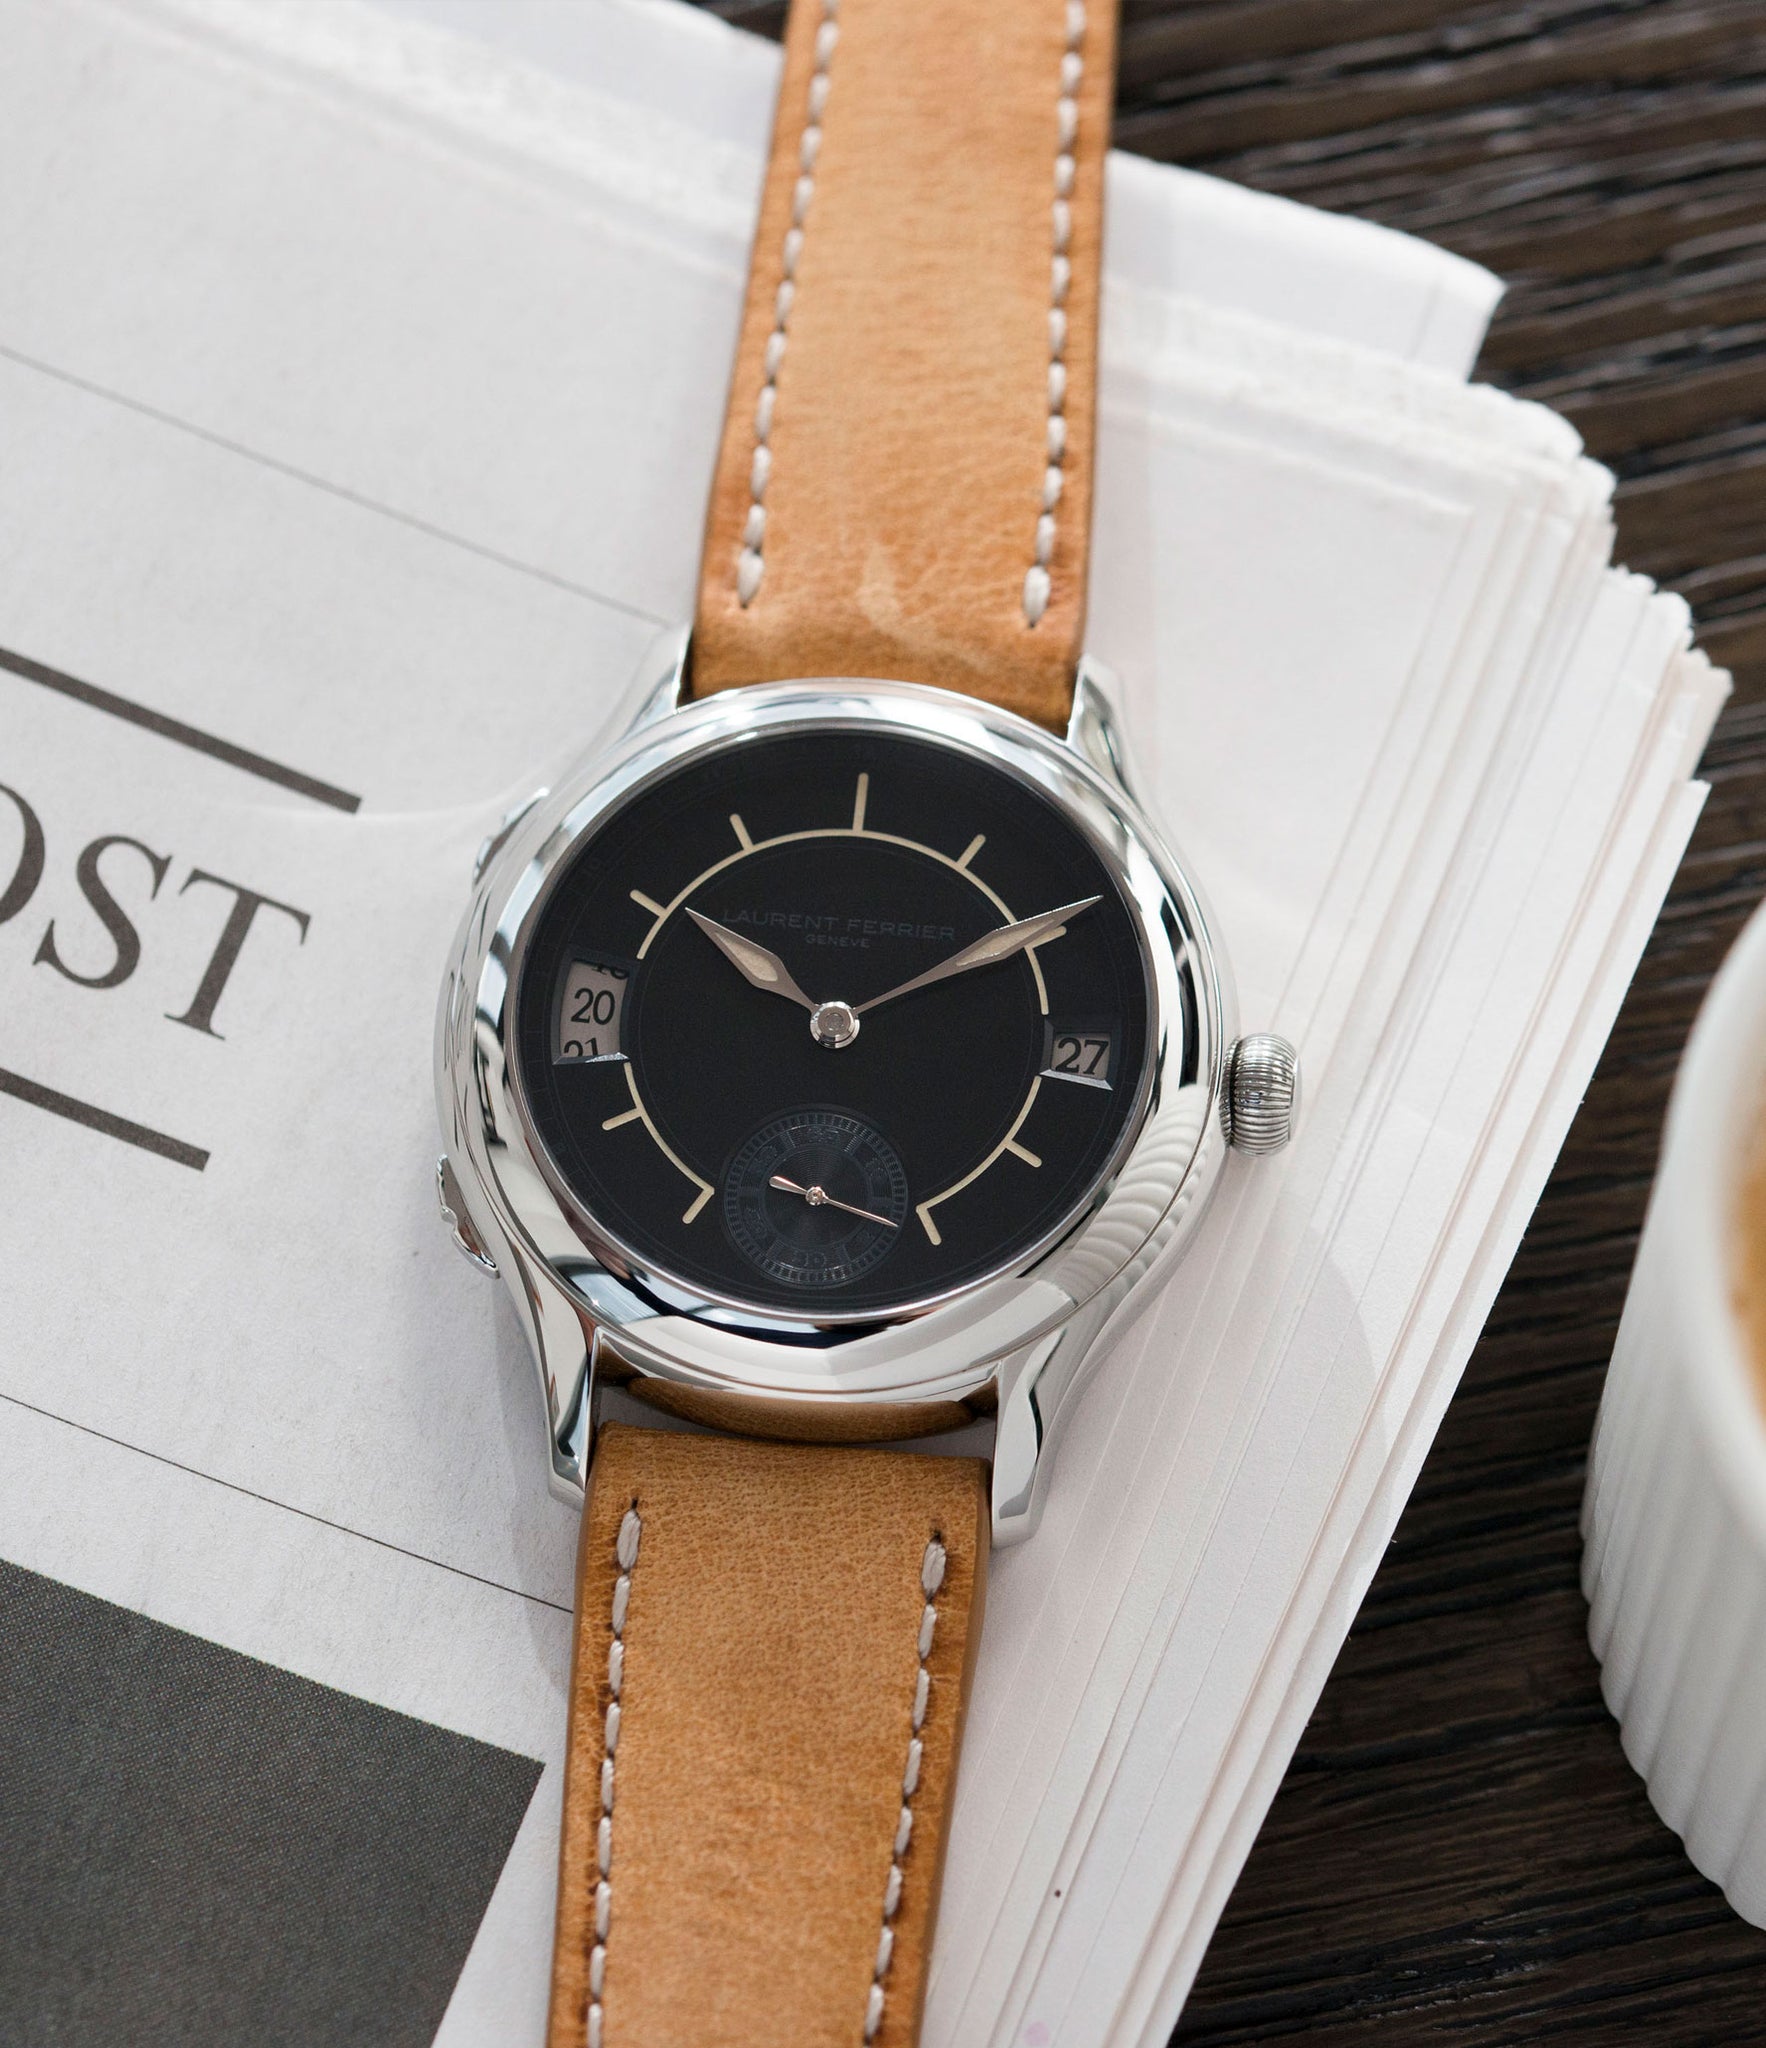 selling Laurent Ferrier Galet Traveller Boreal steel dual-timezone black dial dress watch for sale online at A Collected Man London approved seller of pre-owned Laurent Ferrier independent watchmakers